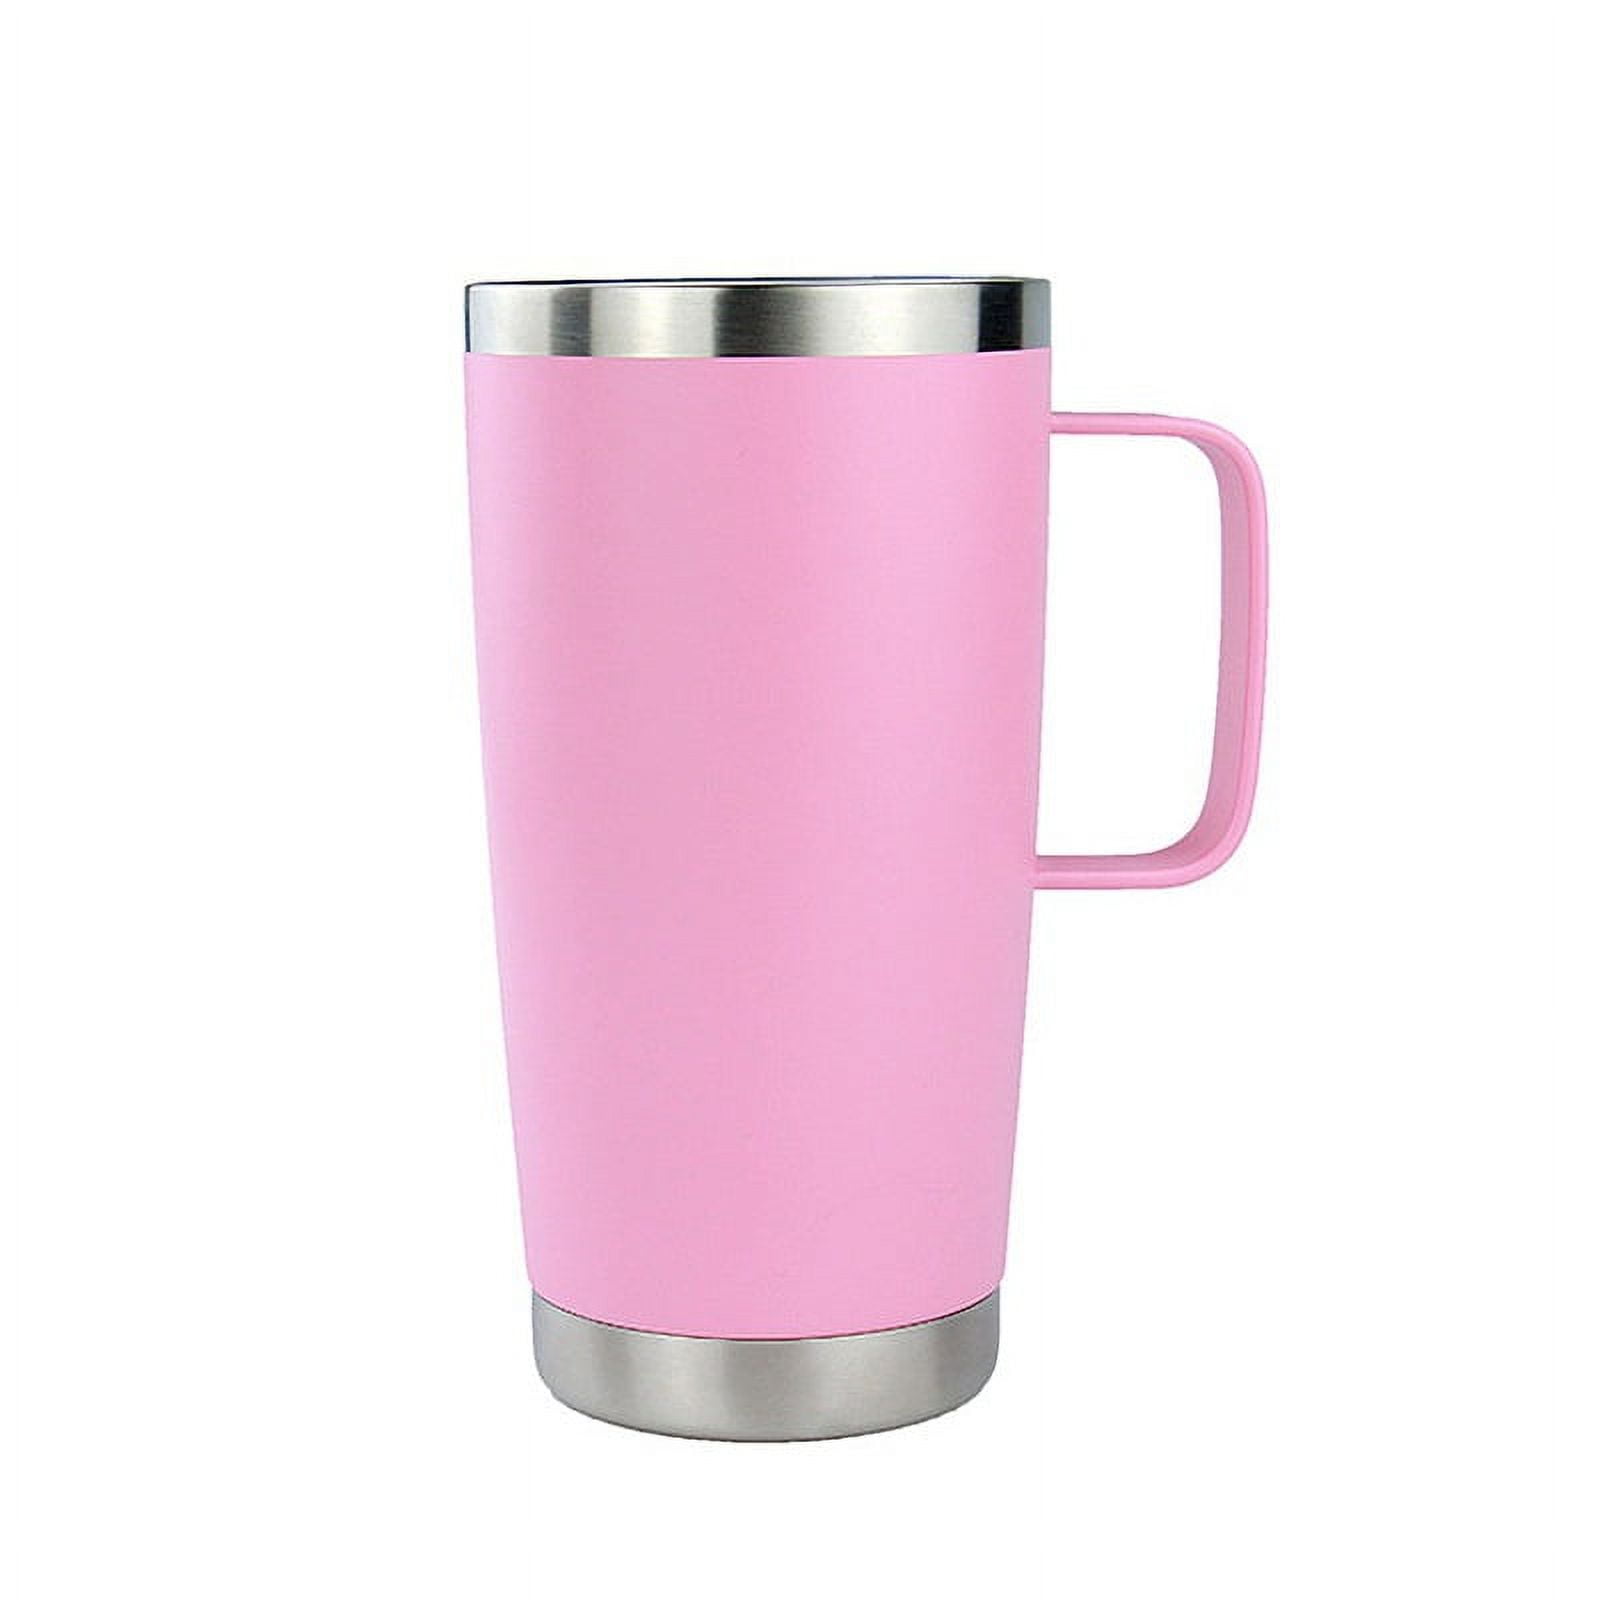 20 oz Tumbler Mug with Lid and Straw, Insulated Travel Coffee Mug with  Handle, Double Wall Stainless Steel Vacuum Coffee Tumbler, Thermal Coffee  Cup